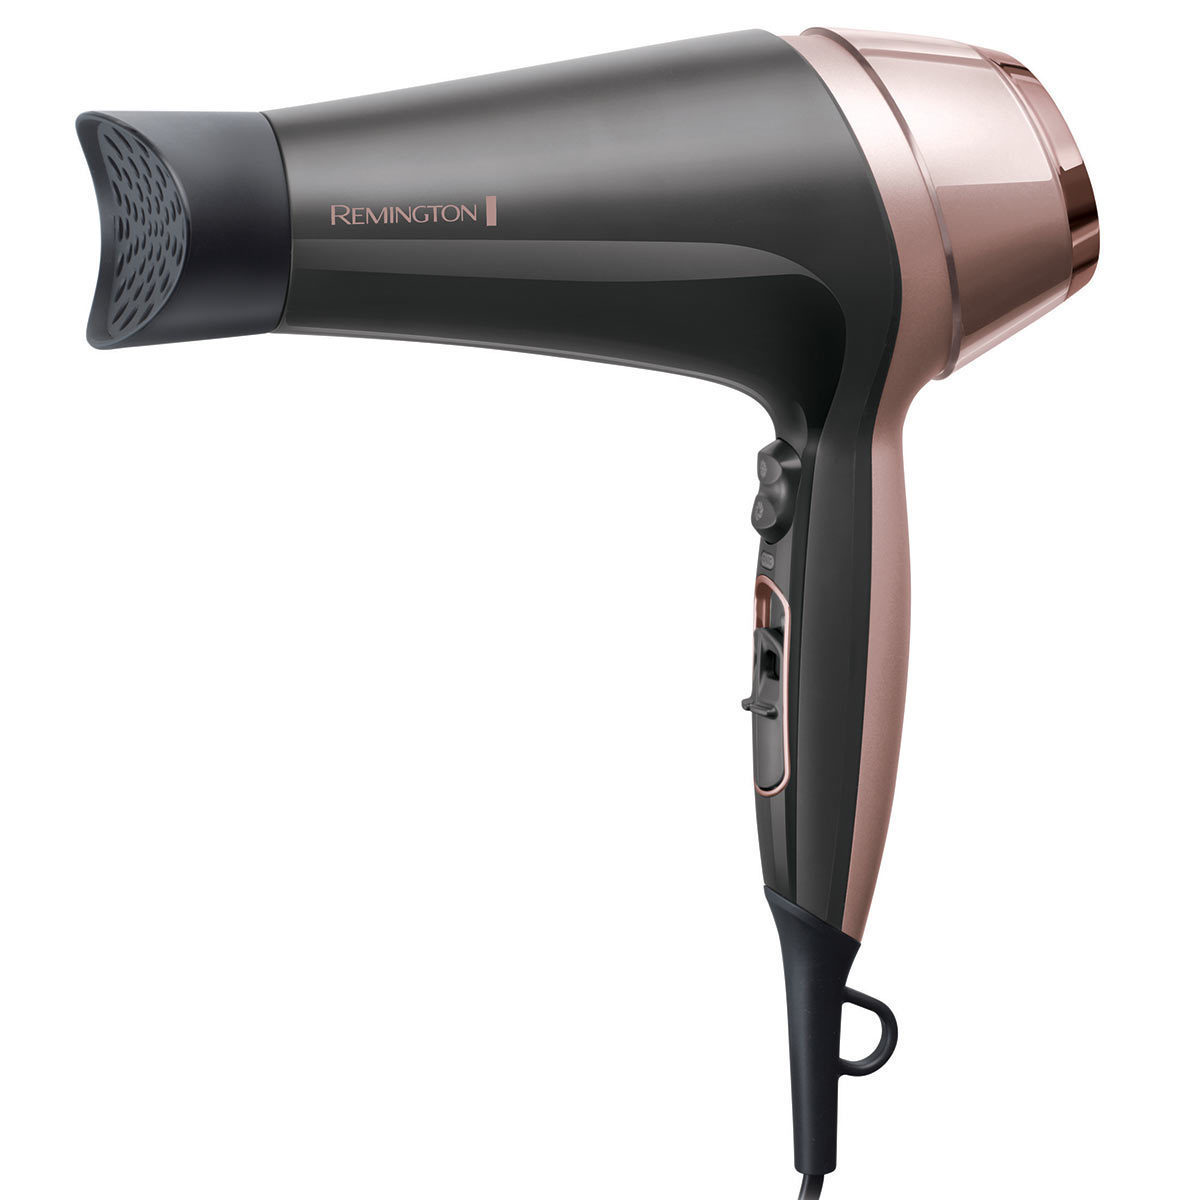 image of hairdryer